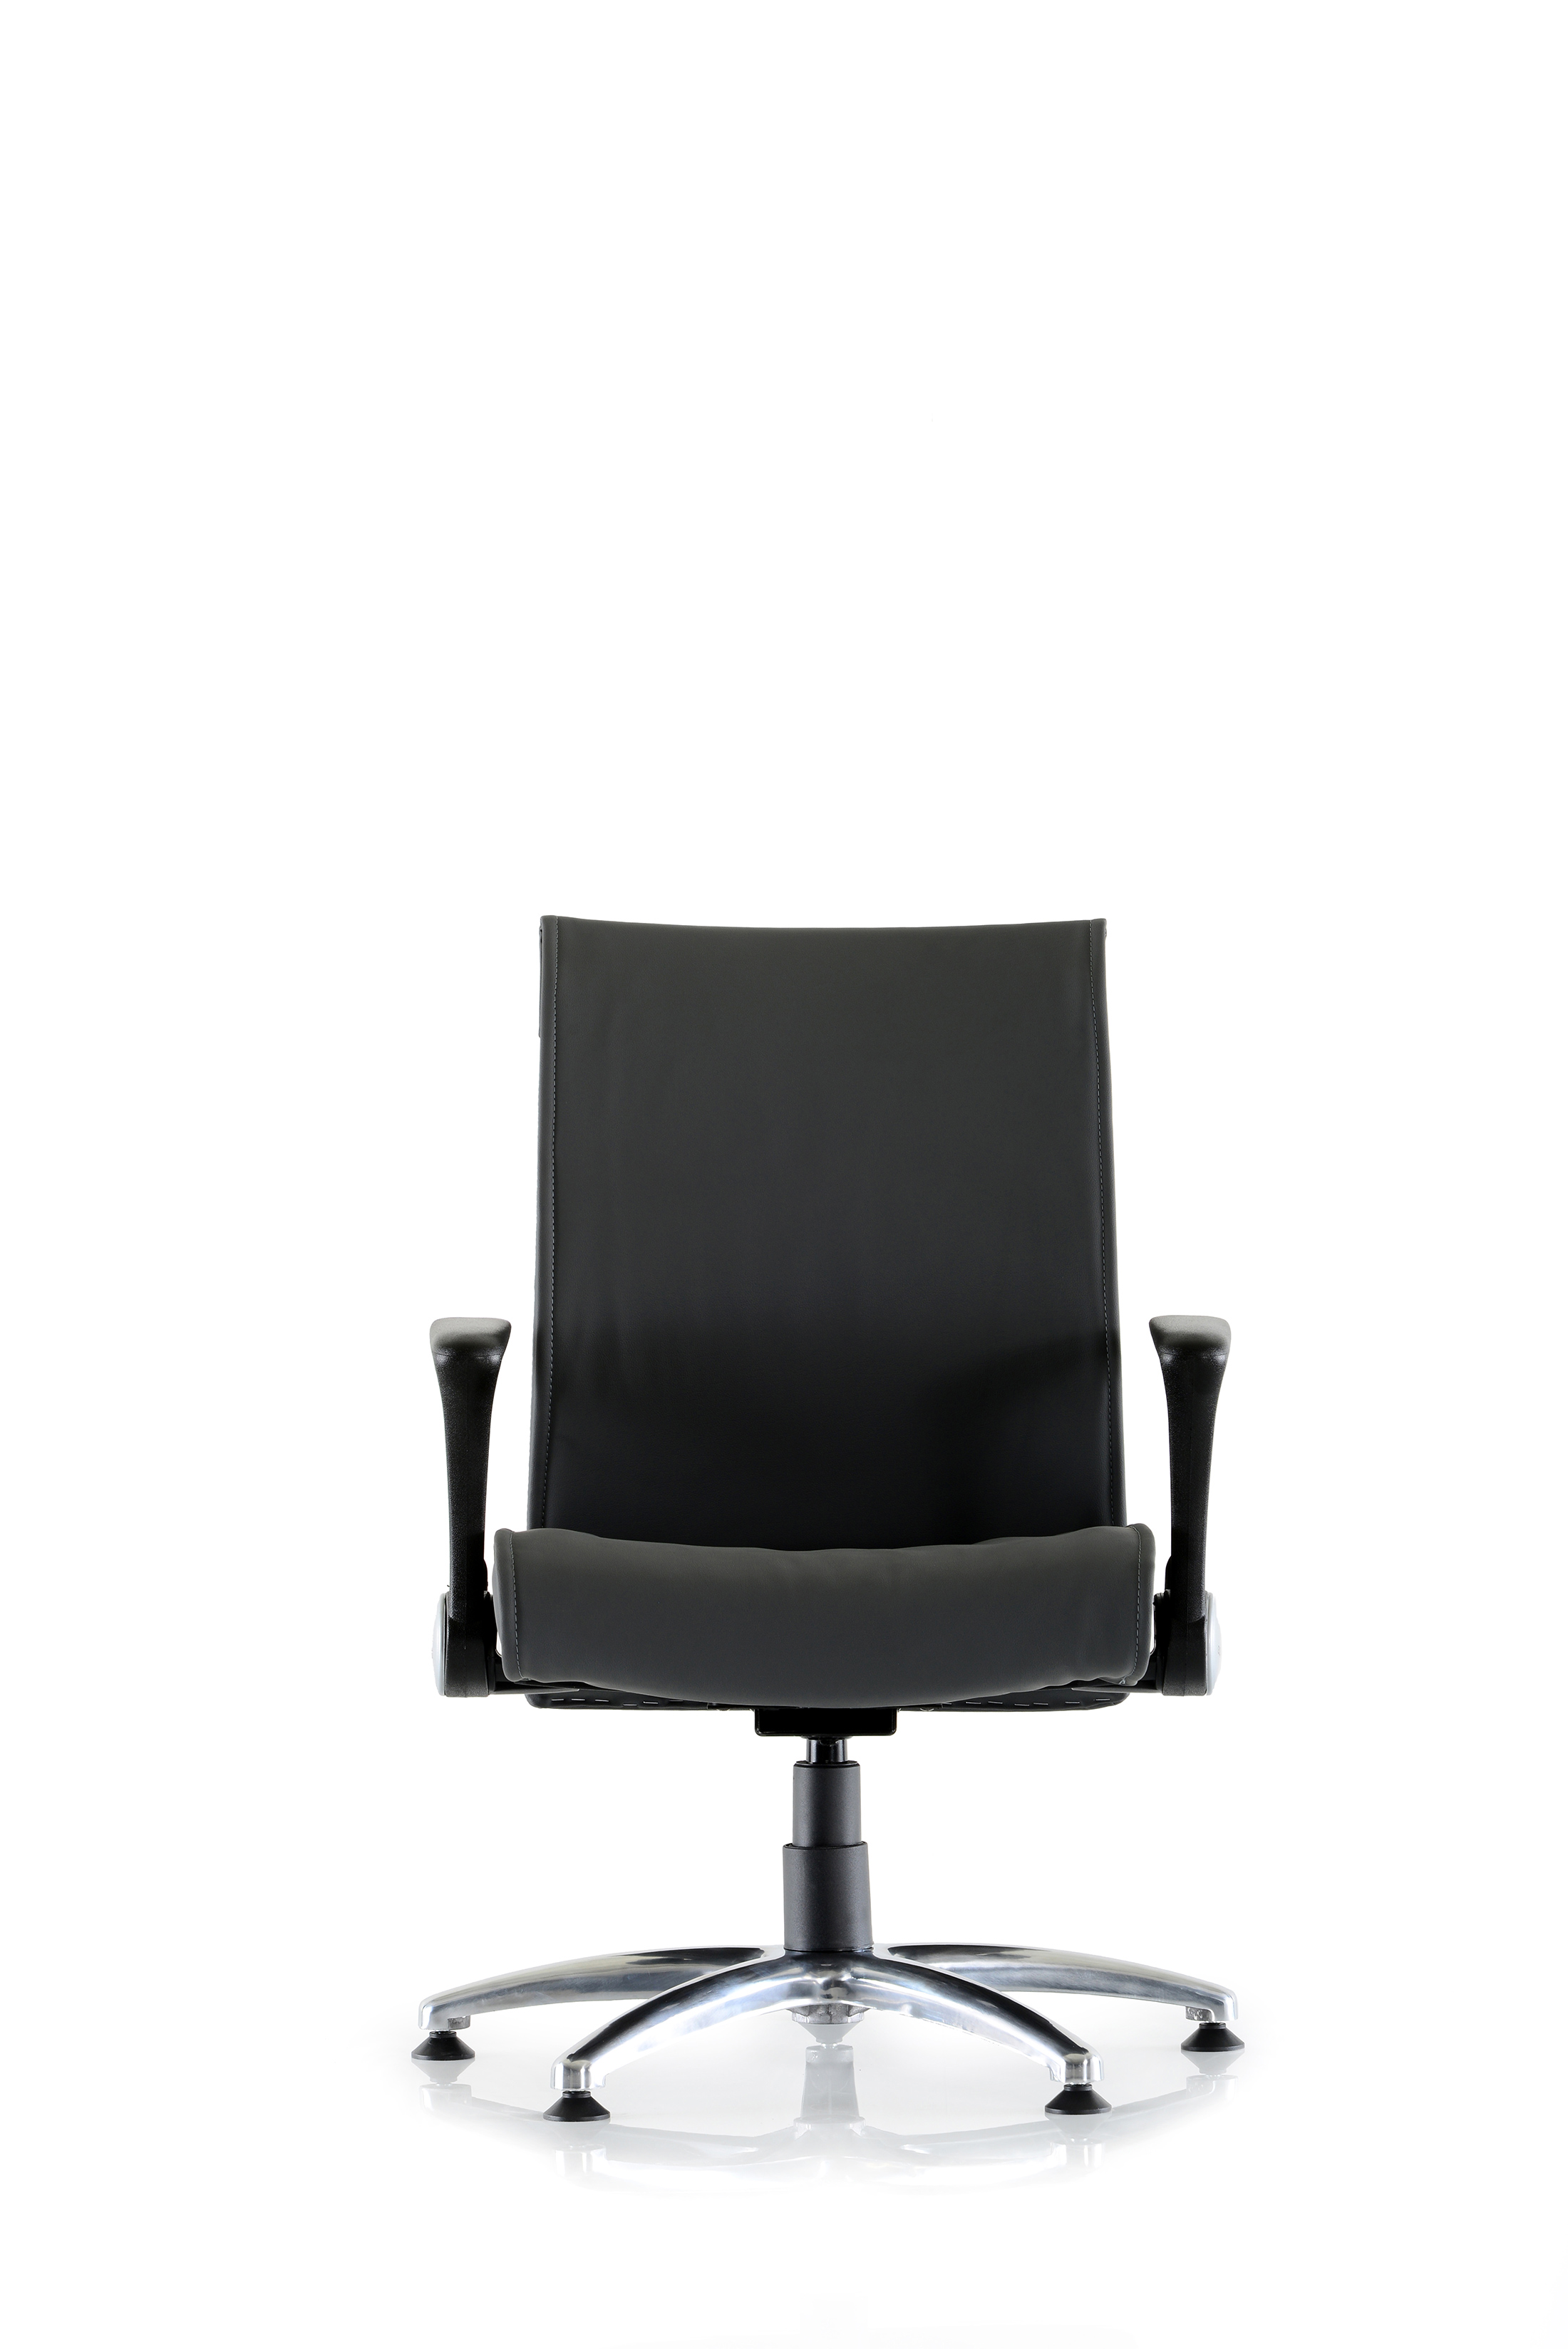 ULTIMA 200C VISITOR CHAIR